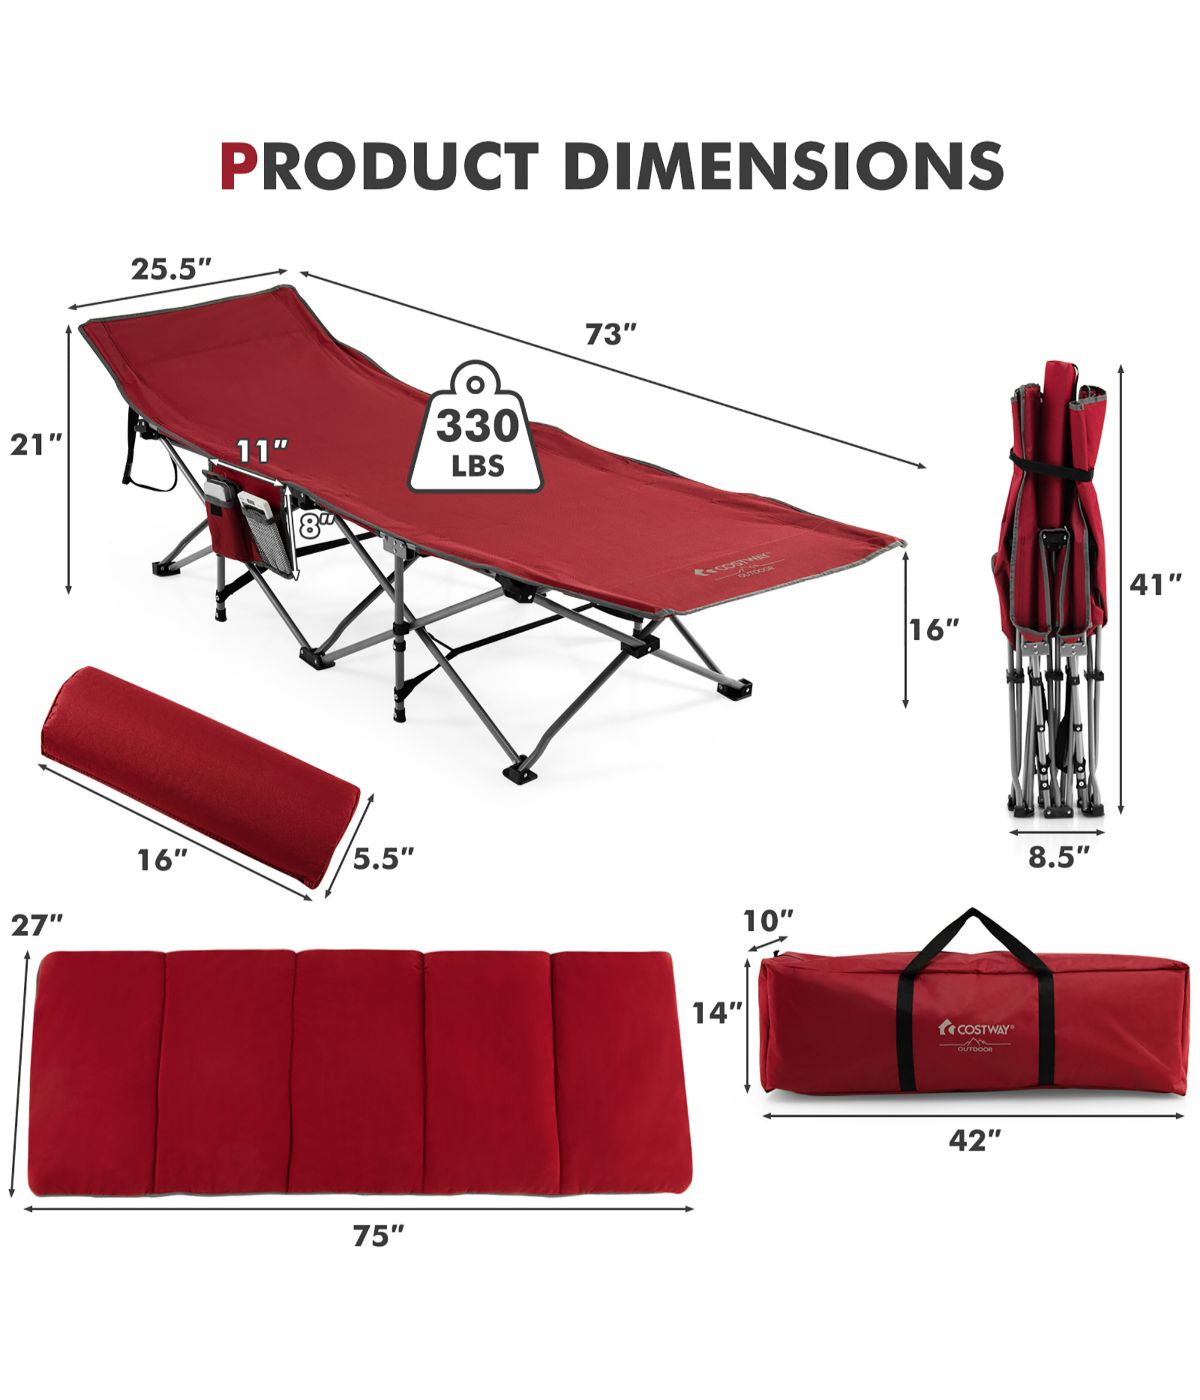 Folding Retractable Travel Camping Cot With Removable Mattress & Carry Bag Red